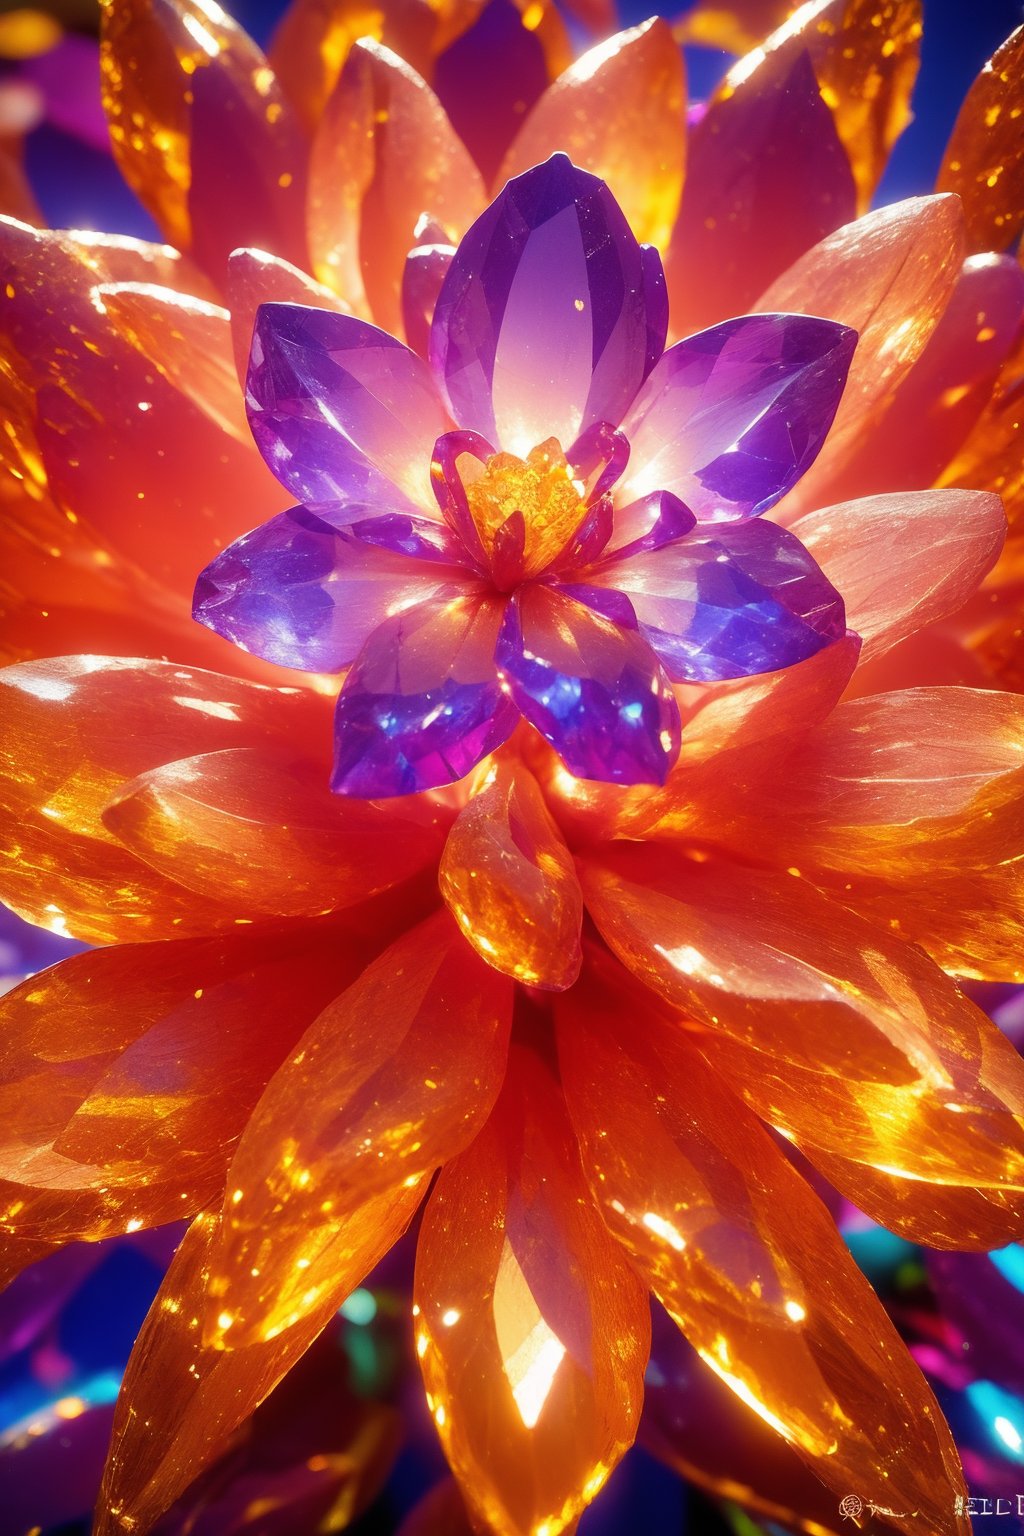 (((photographic, photo, photogenic))), extremely high quality high detail RAW color photo, crystal flower, intricate crystal patterns, translucent petals, prismatic light refraction, sharp, precise edges, detailed textures, luminous glow,